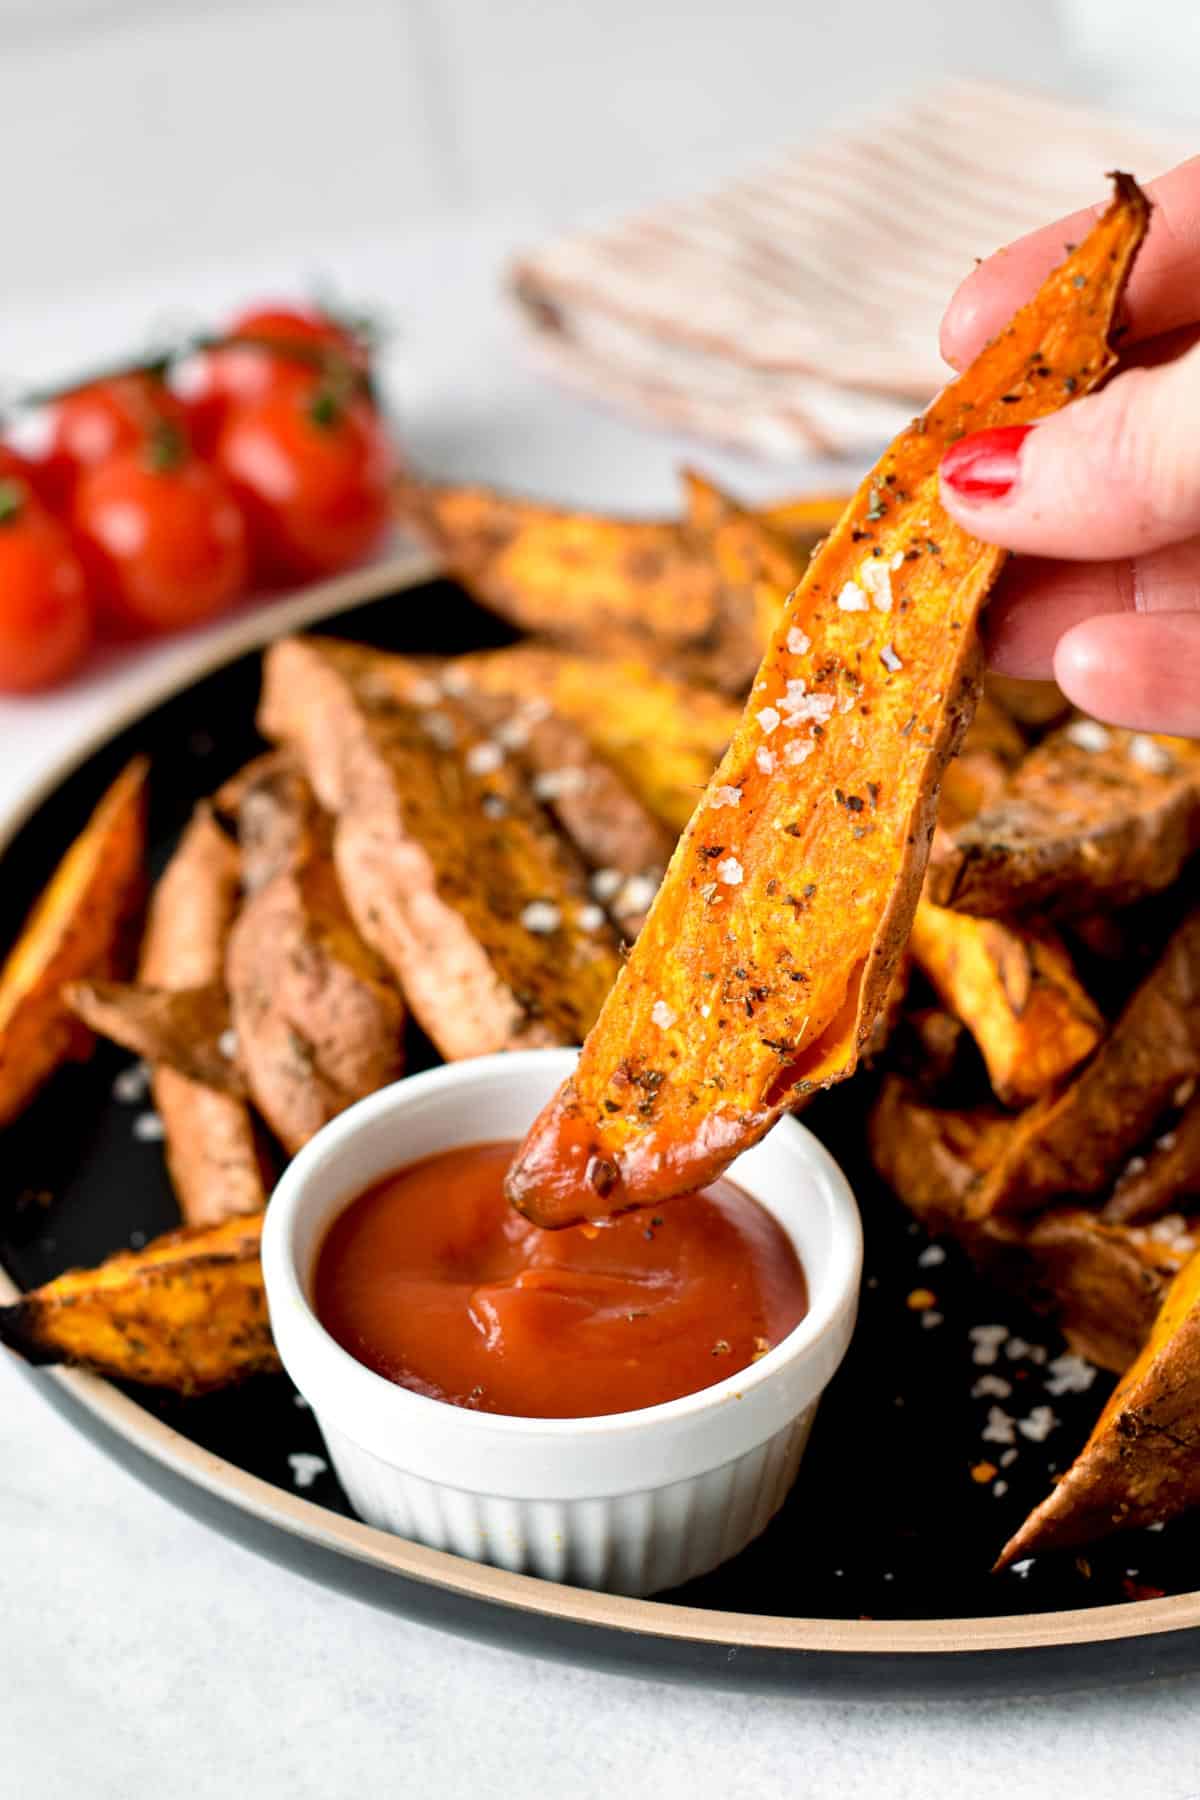 These Air Fryer Sweet Potato Wedges are easy, healthy and crispy wedges of orange sweet potatoes, perfect as a quick healthy side dish.